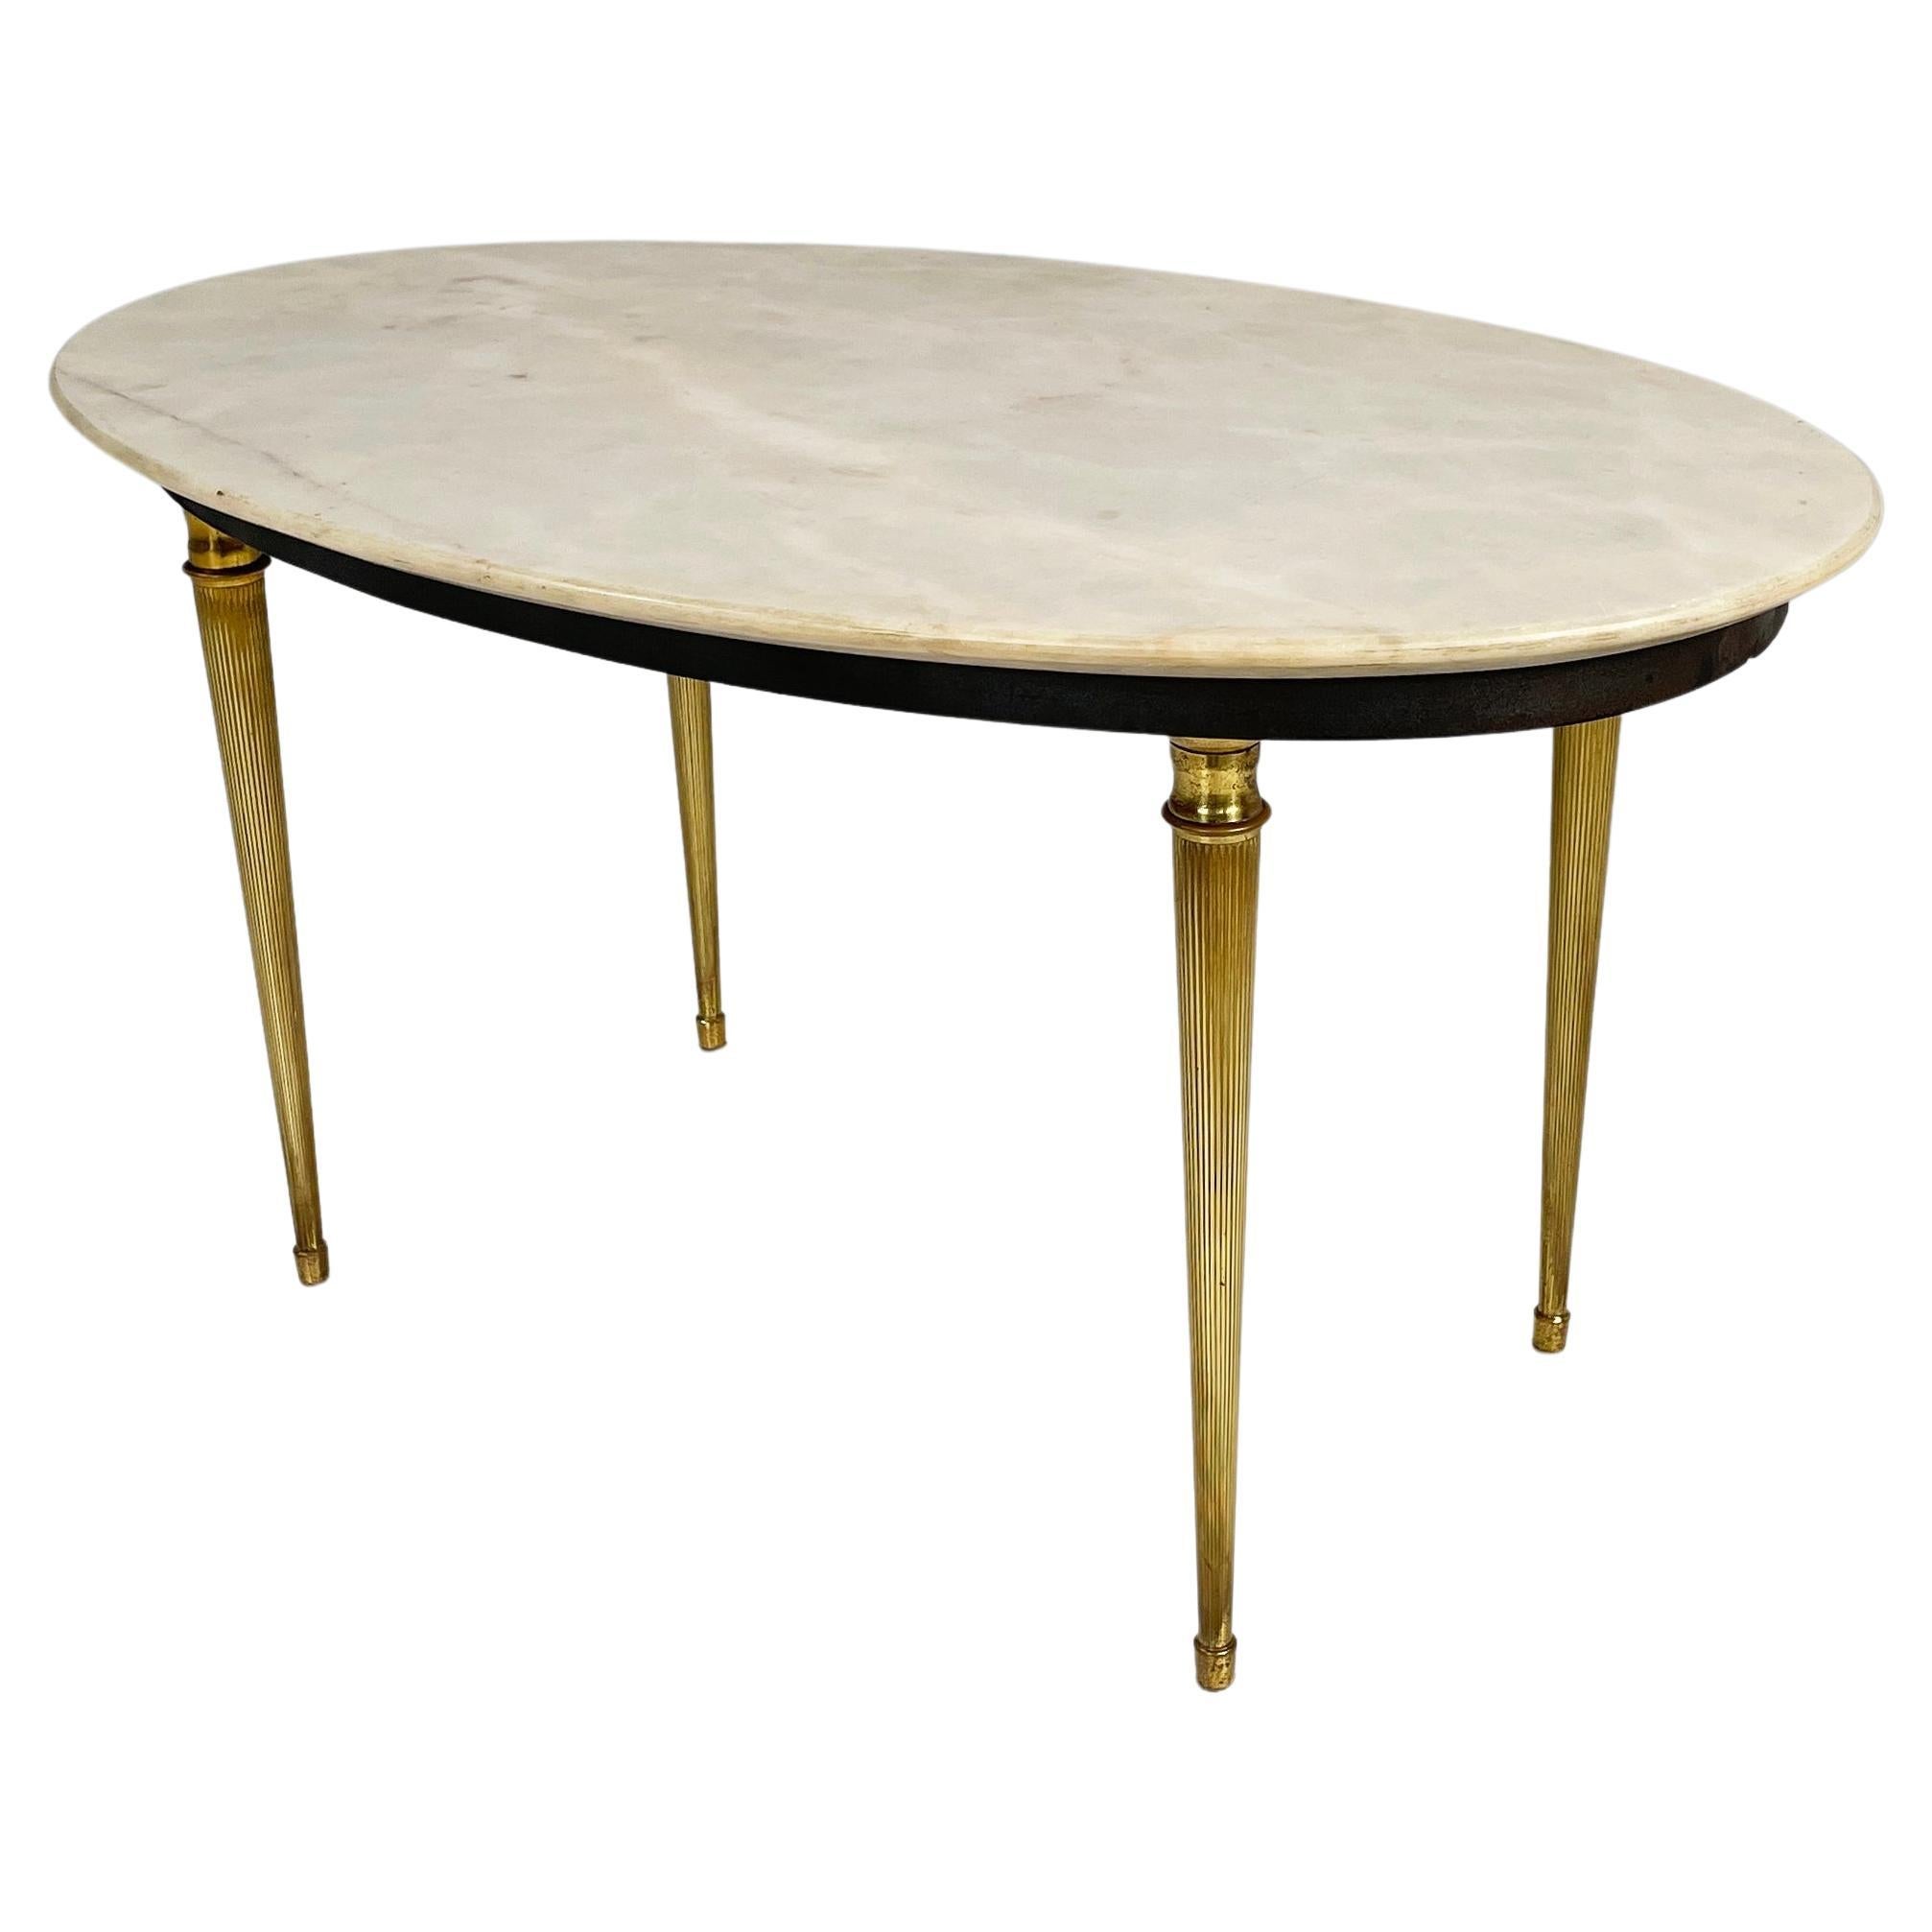 Italian mid-century modern Oval coffee table in light marble and brass, 1950s For Sale